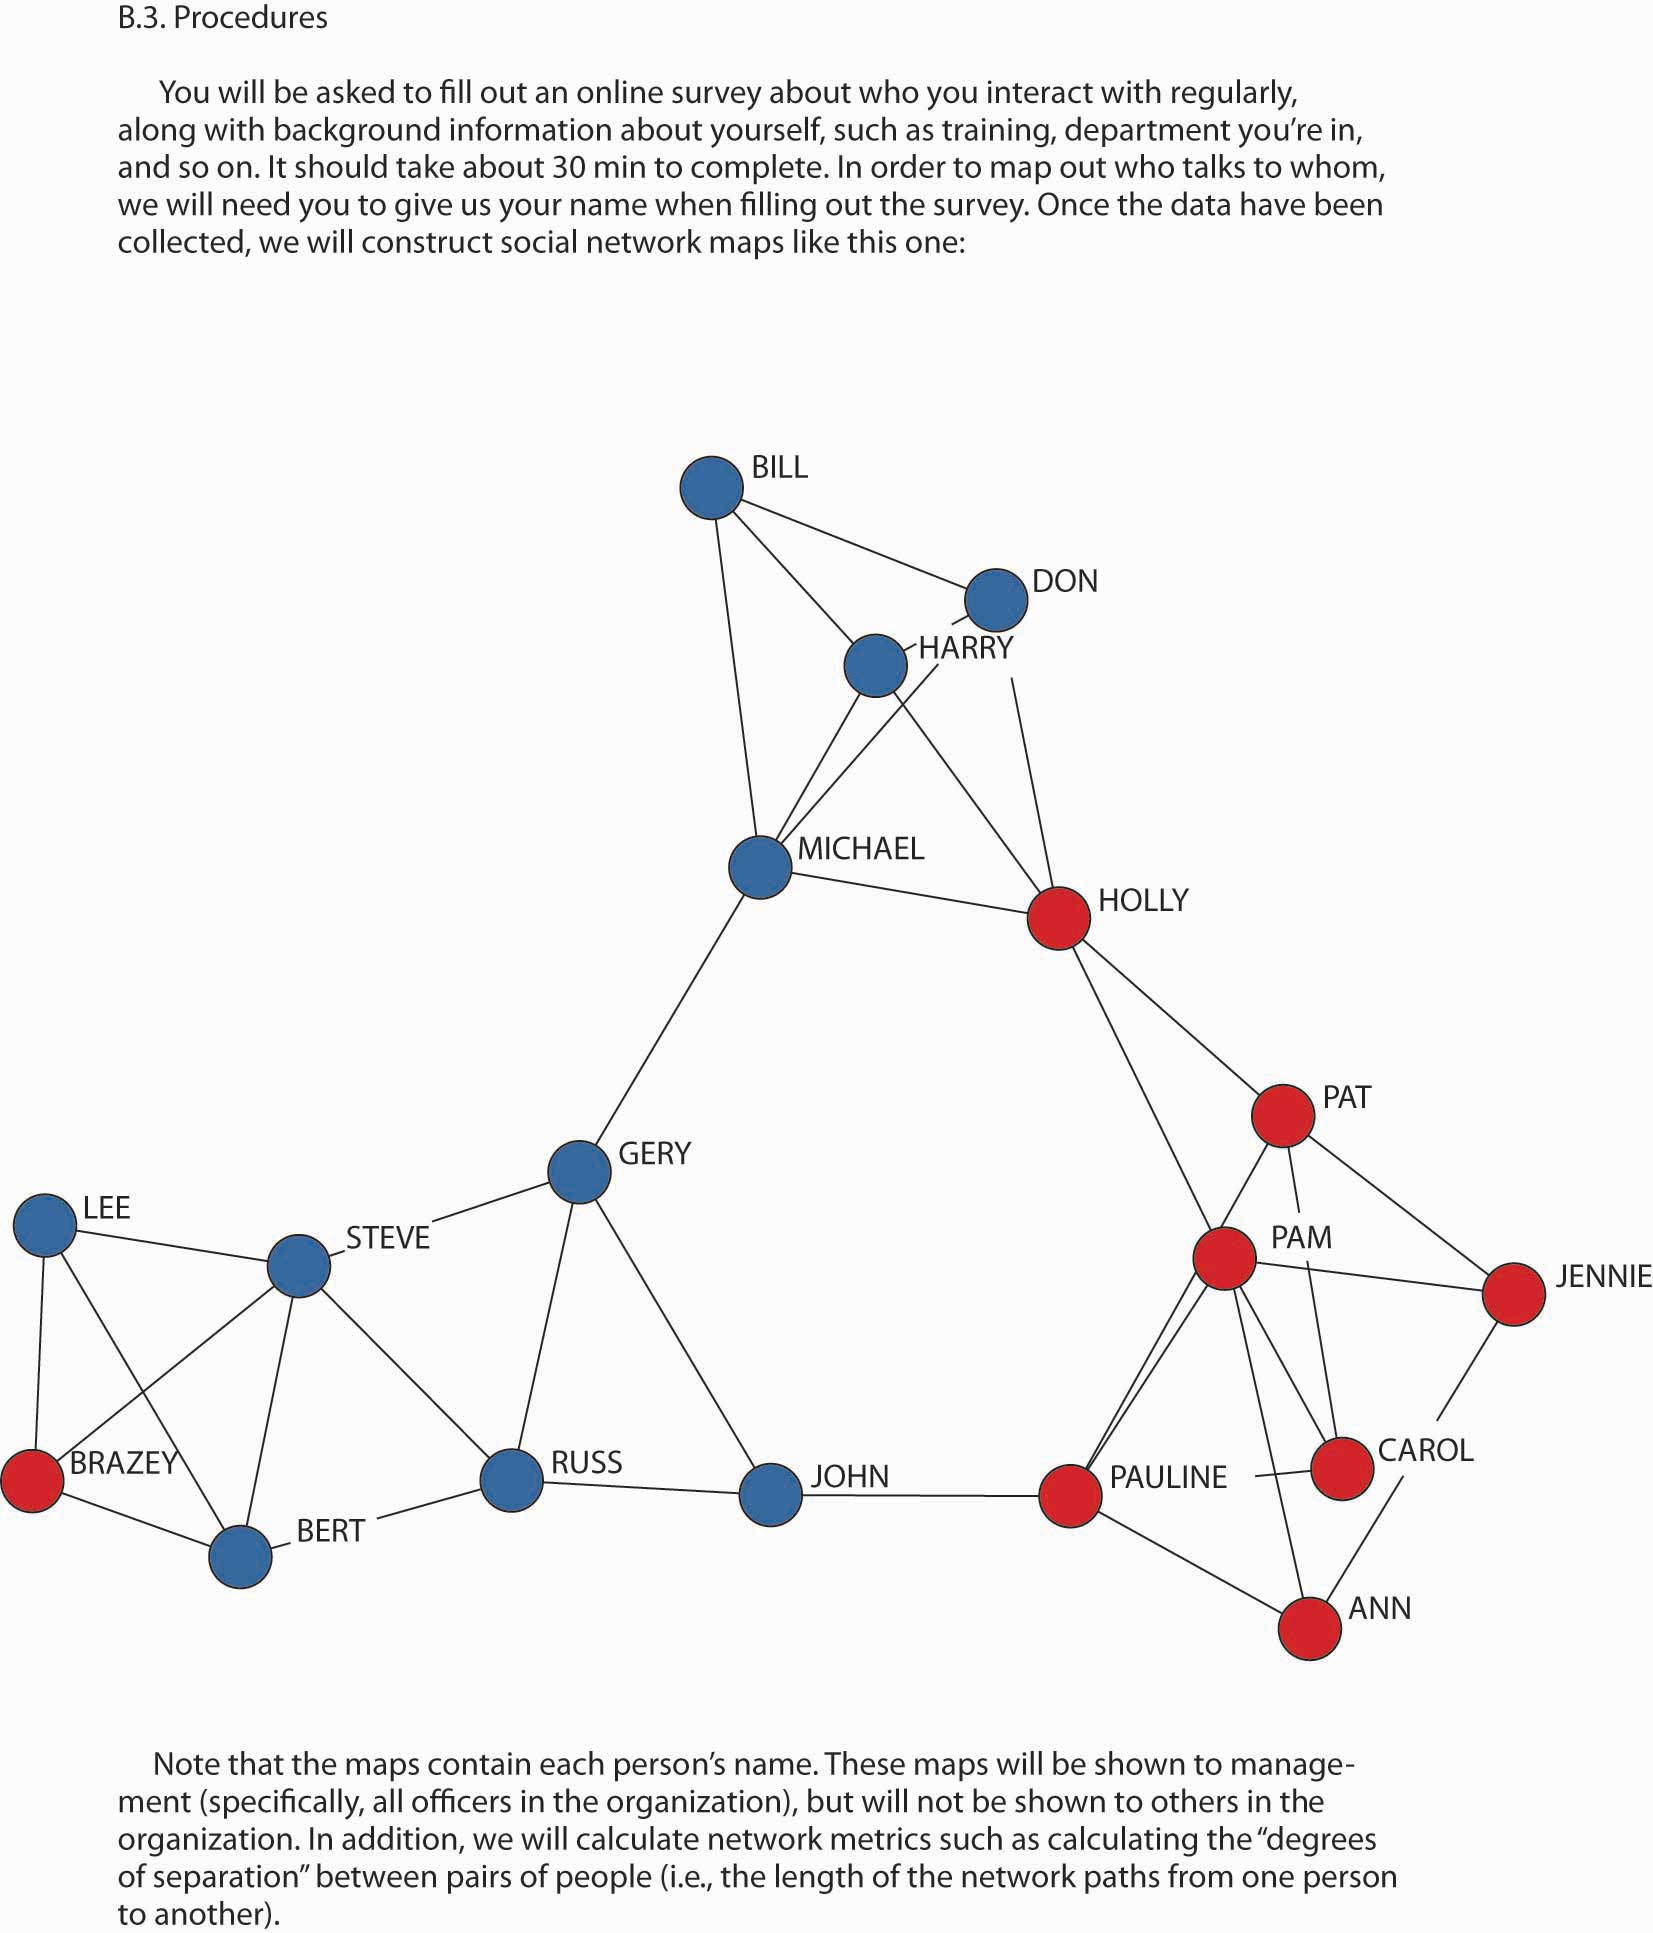 Social Network Analysis for Foundations: Six Ideas to Scale Impact -  Visible Network Labs